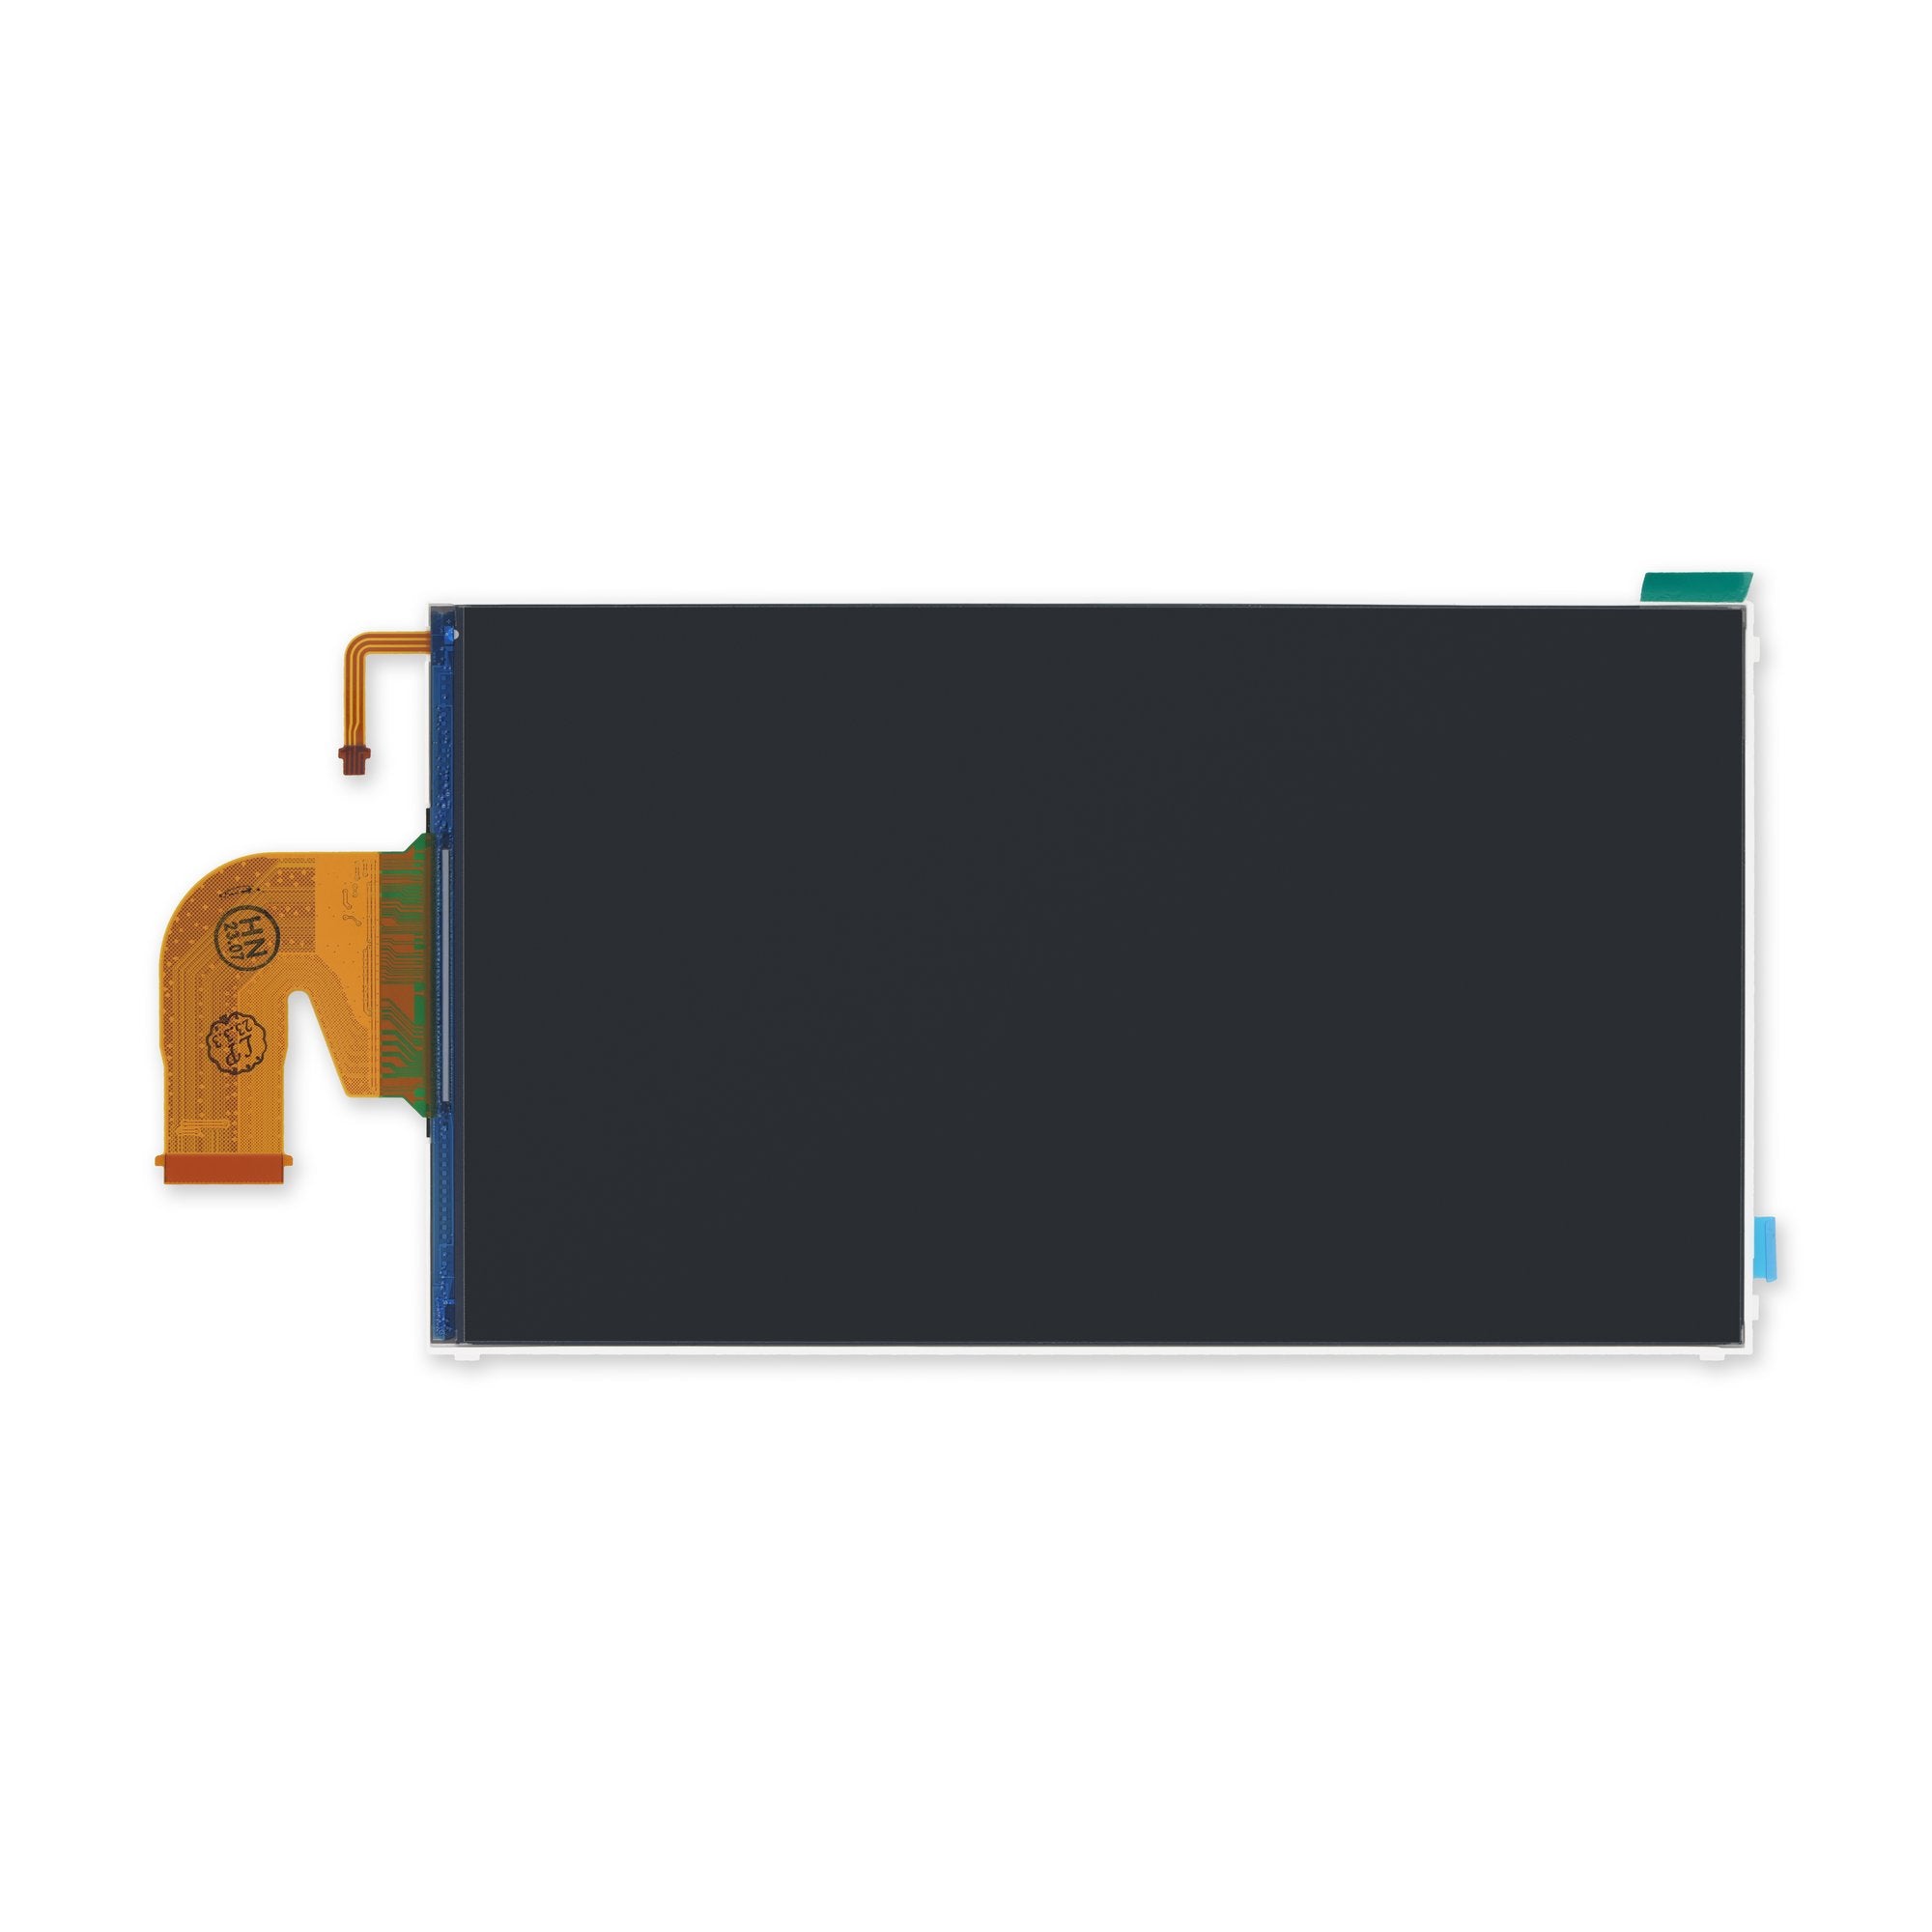 Nintendo Switch LCD Used